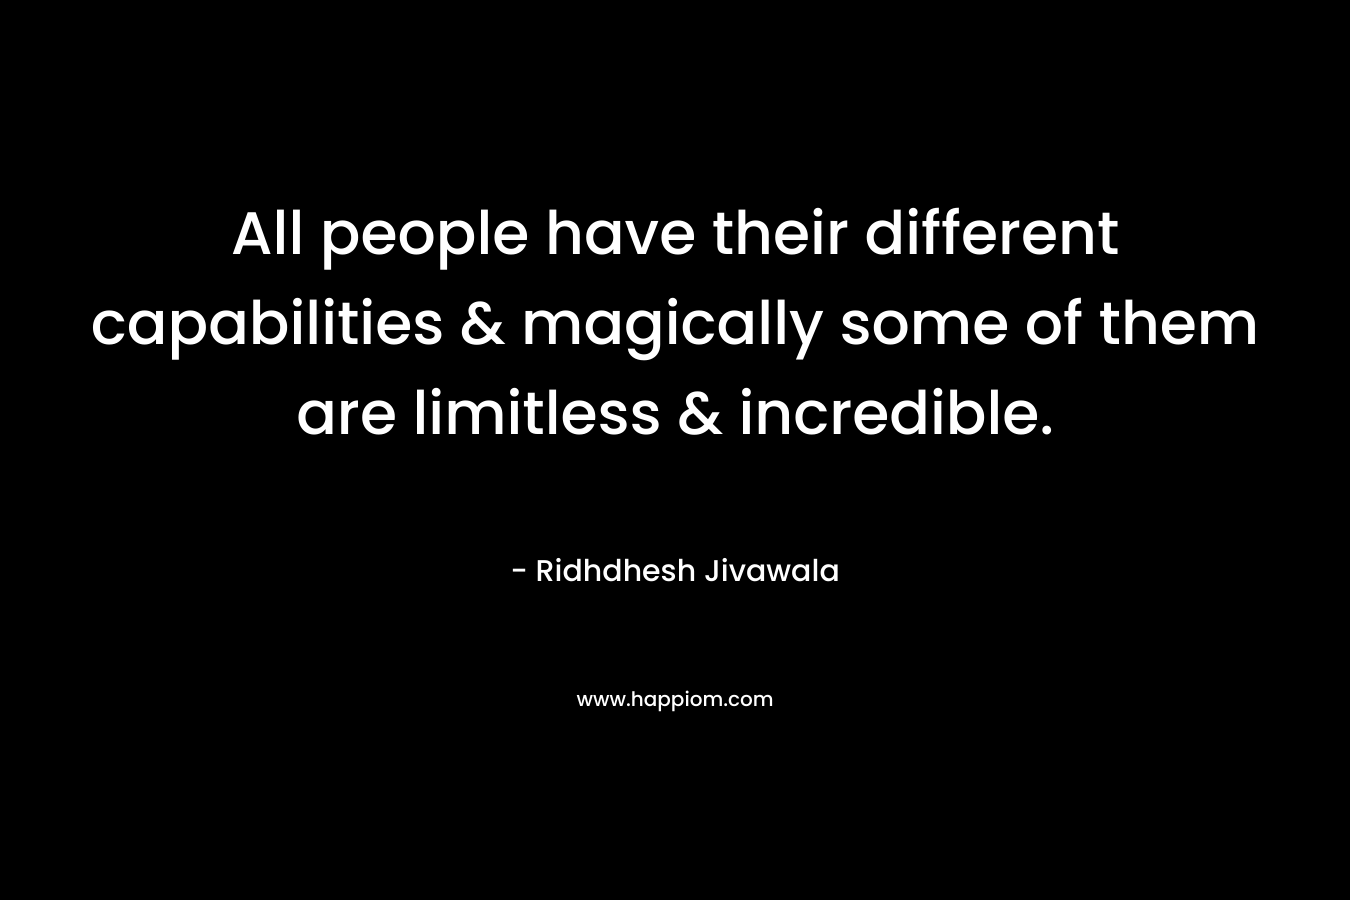 All people have their different capabilities & magically some of them are limitless & incredible.